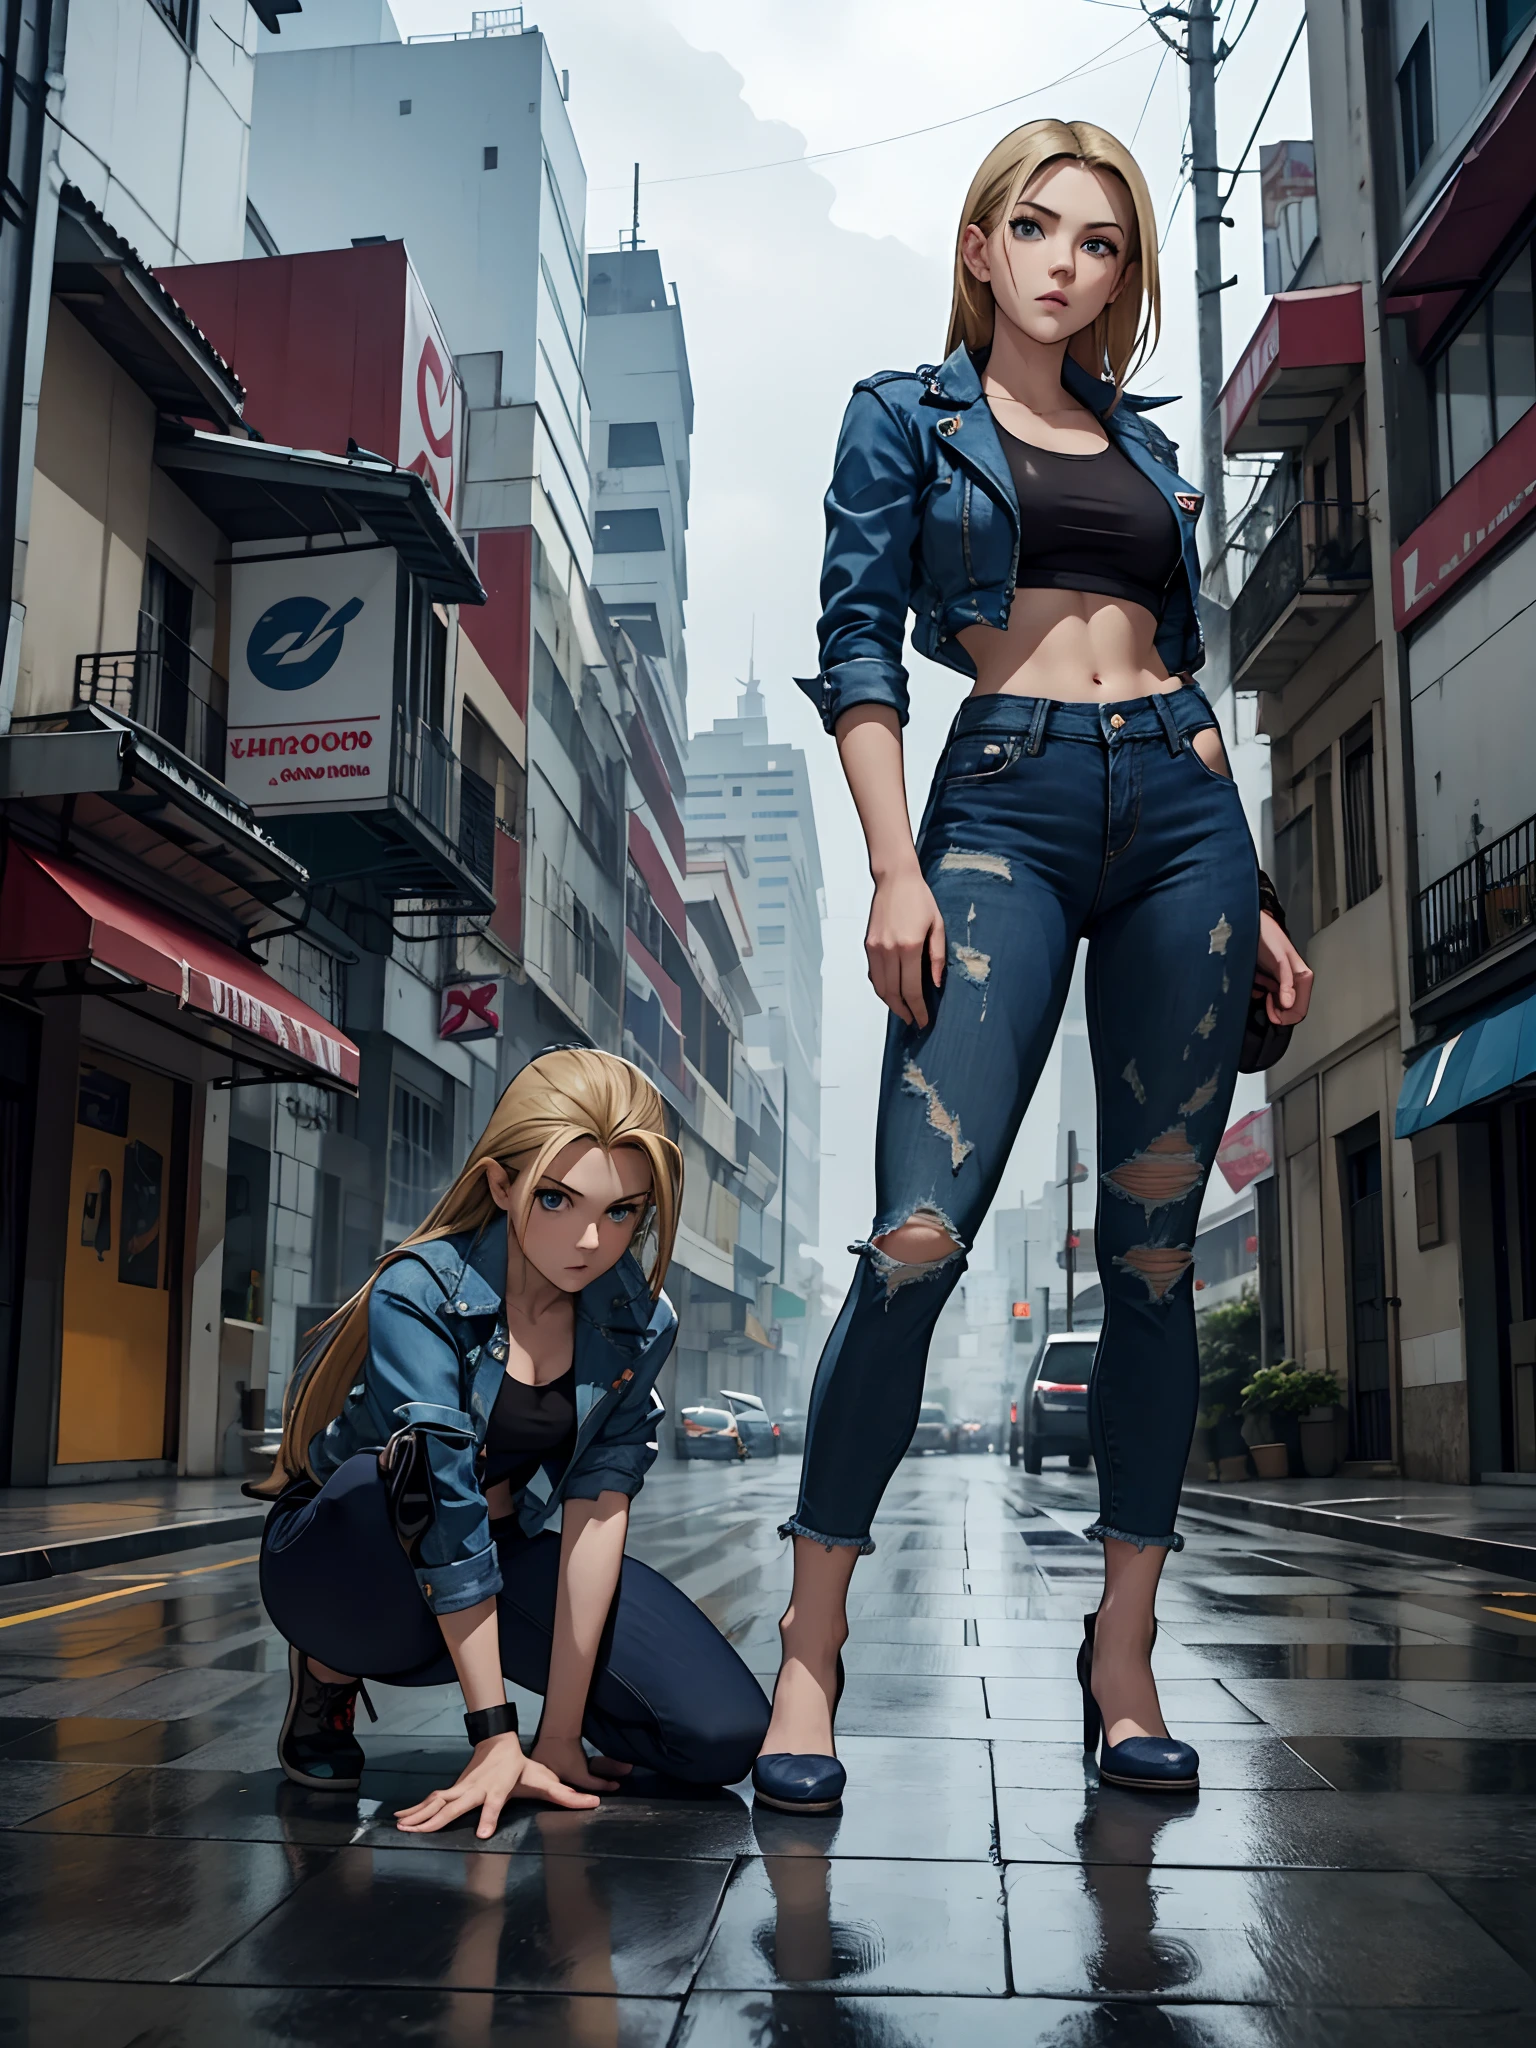 aya break, parasite eve, 3d, Video game character, realisitic, best qualityer, DESTROYED CITY, haze, hair blonde, Blue Eyes Far Angle, Ratio 4:3, wall-paper,best qualityer, ultra HD, 8k, fully body, em on, destroyed jeans, ,gypsy bodice, Above the Knee, Faraway view, perfect legs,Street, natta, flames, Raby